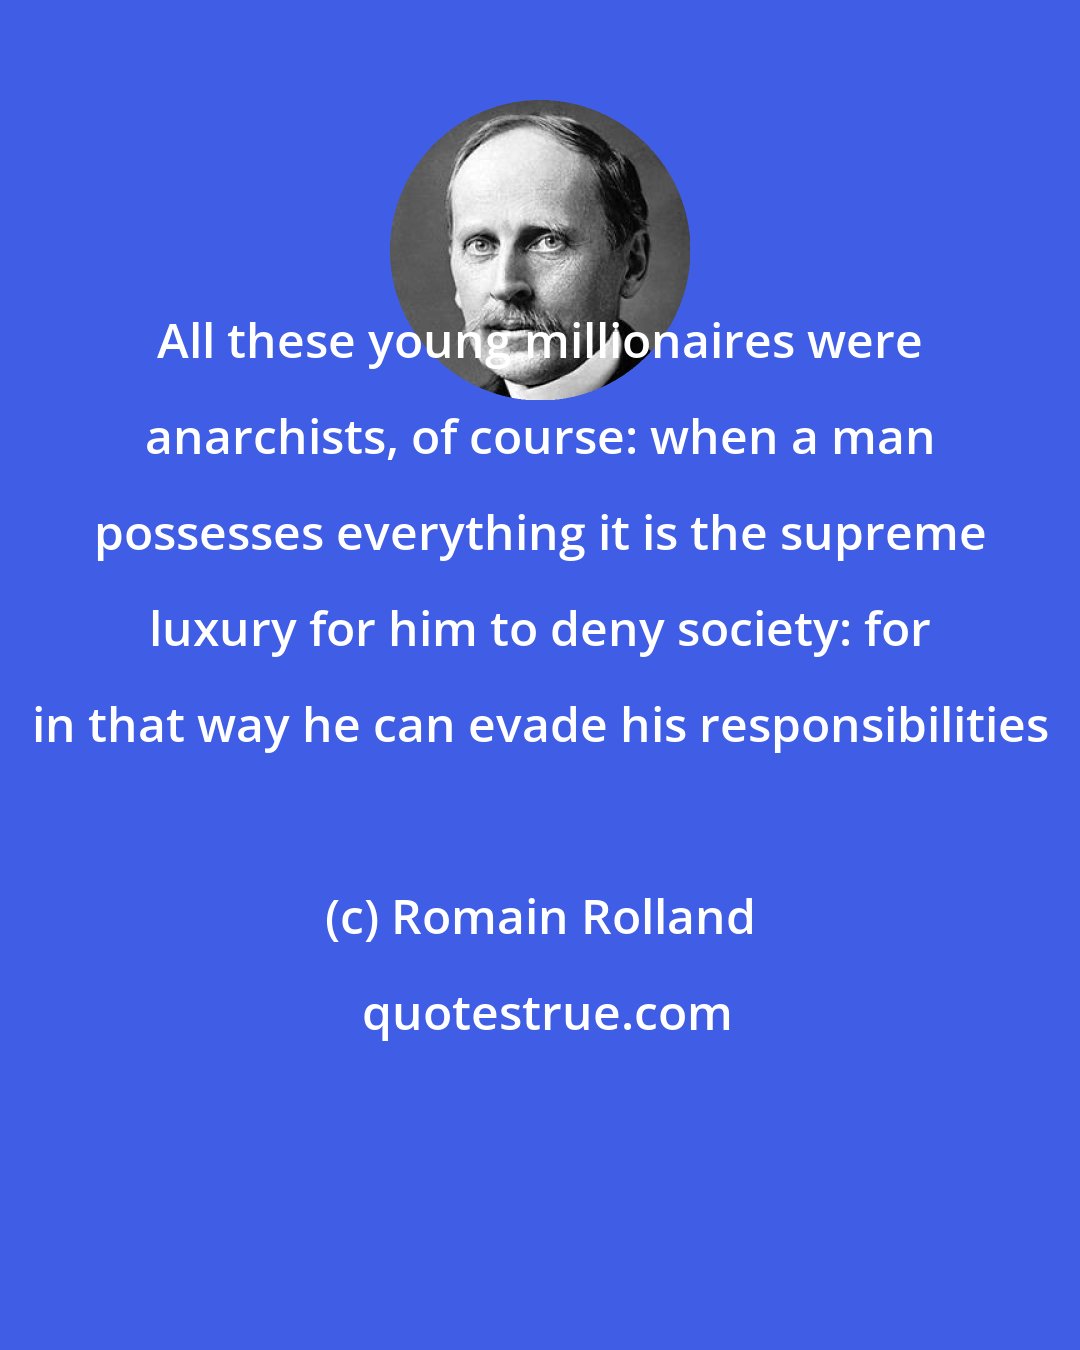 Romain Rolland: All these young millionaires were anarchists, of course: when a man possesses everything it is the supreme luxury for him to deny society: for in that way he can evade his responsibilities